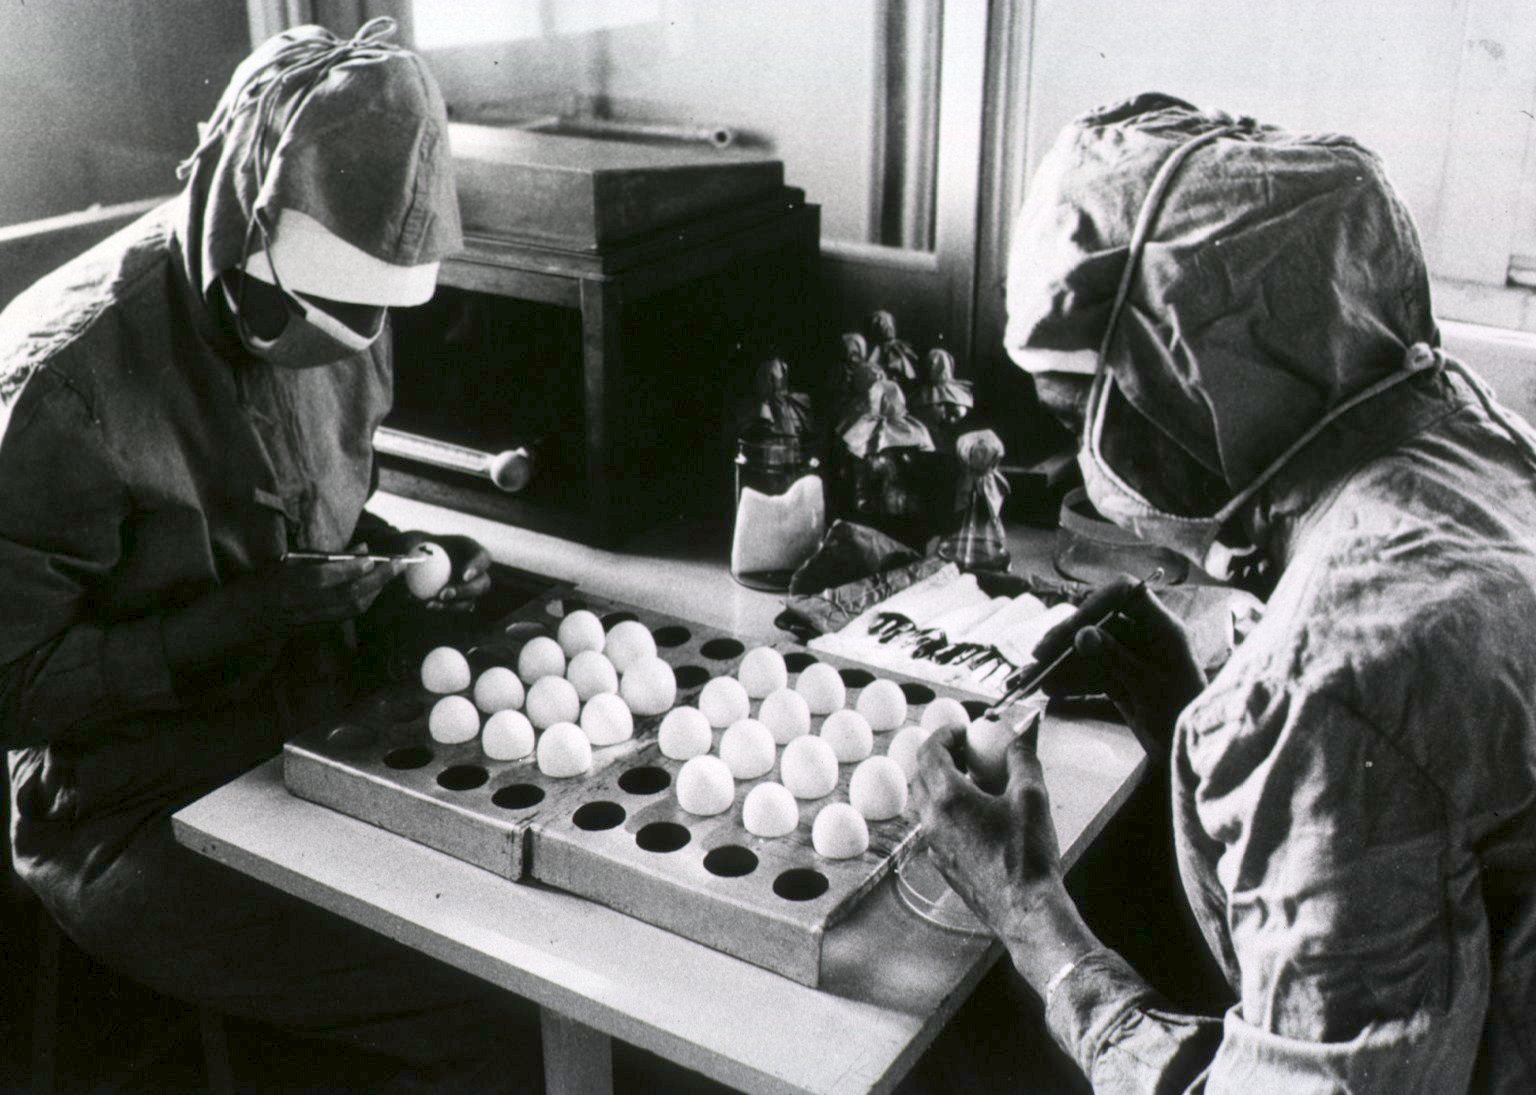 File:Preparation of measles vaccines.jpg - Wikimedia Commons